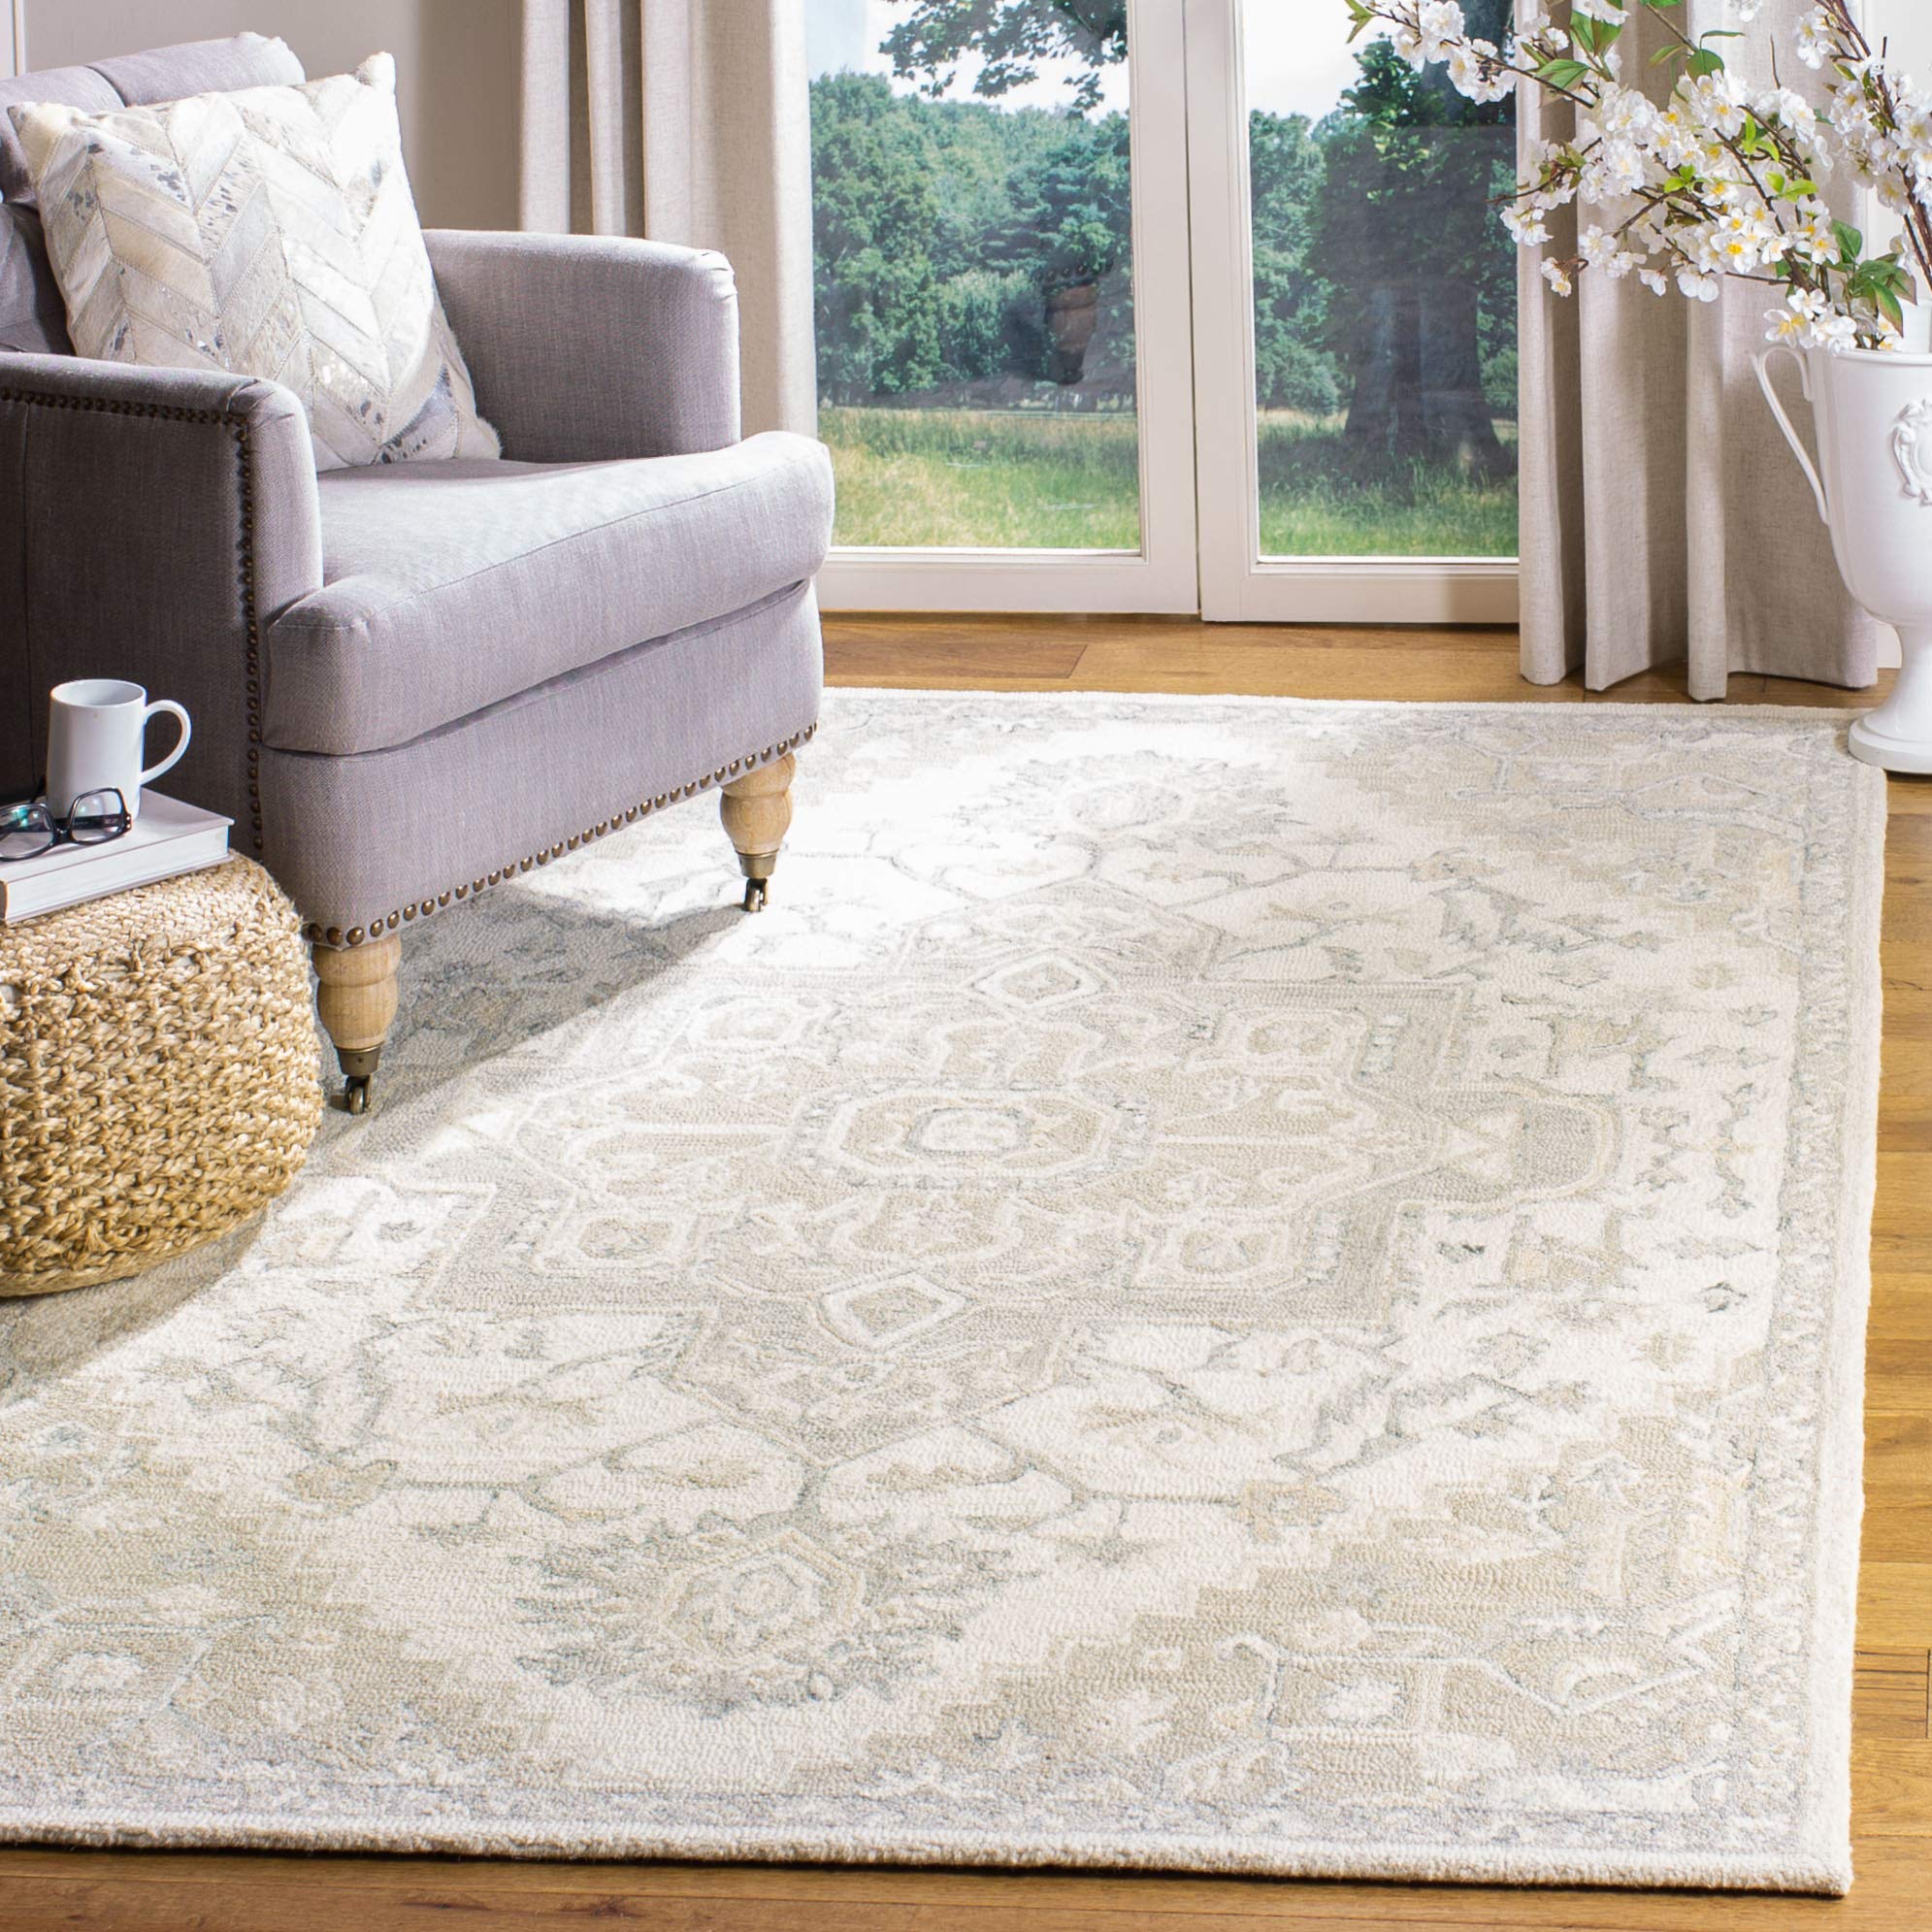 SAFAVIEH Micro-Loop Collection Area Rug - 9' x 12', Ivory & Beige, Handmade Shabby Chic Medallion Wool, Ideal for High Traffic Areas in Living Room, Bedroom (MLP503B)